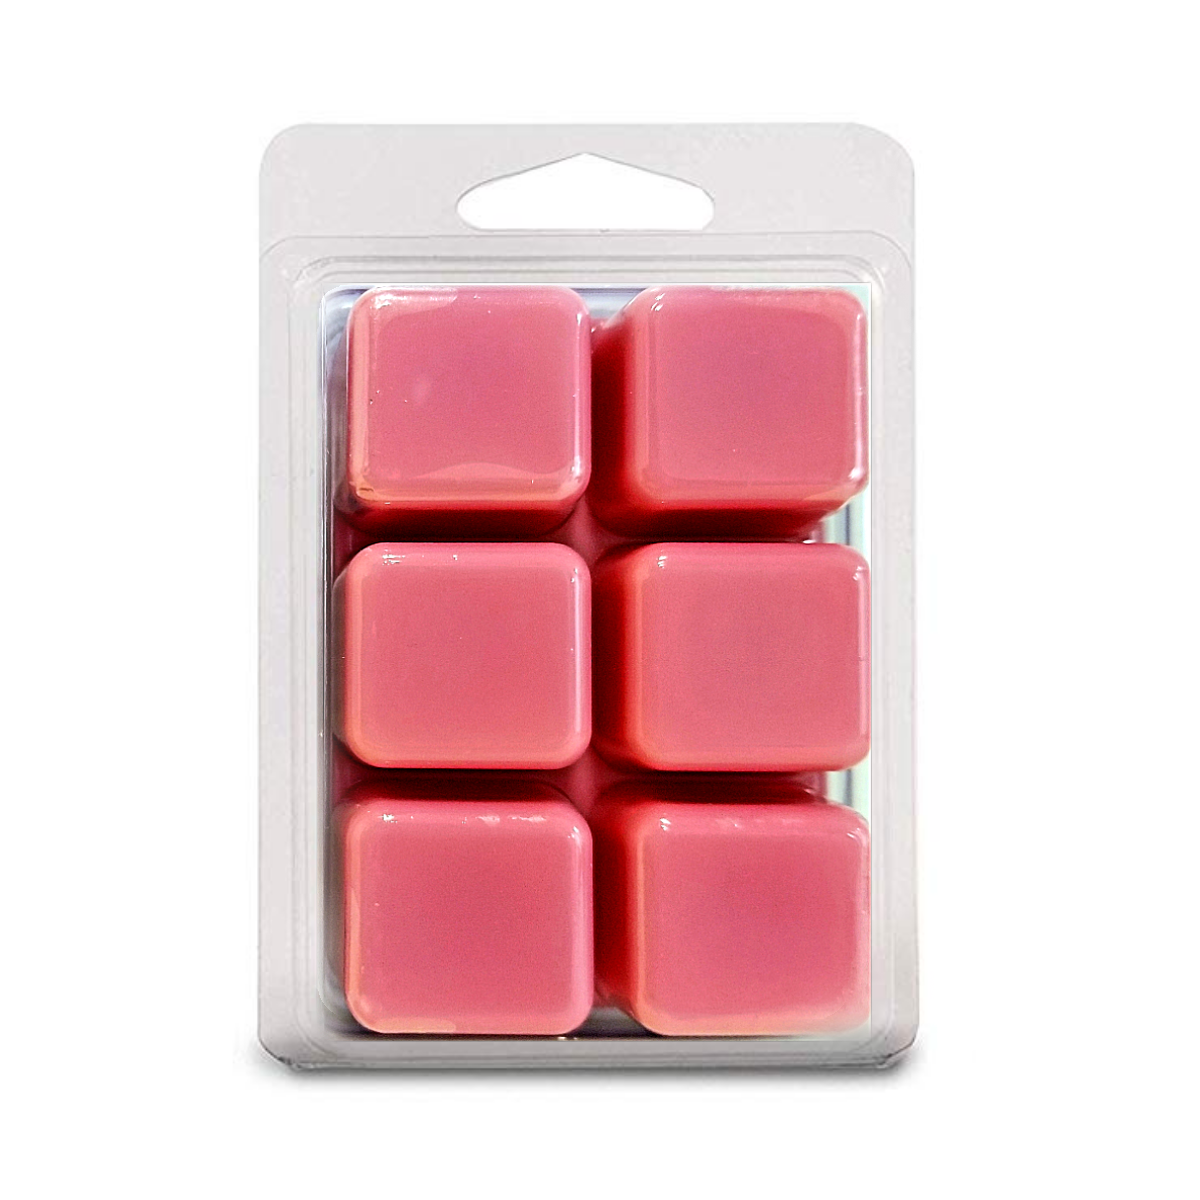 Scent Brick This Is a Beautiful Fragr Wisteria 3.2 Ounce Pack of Soy Wax Tarts 